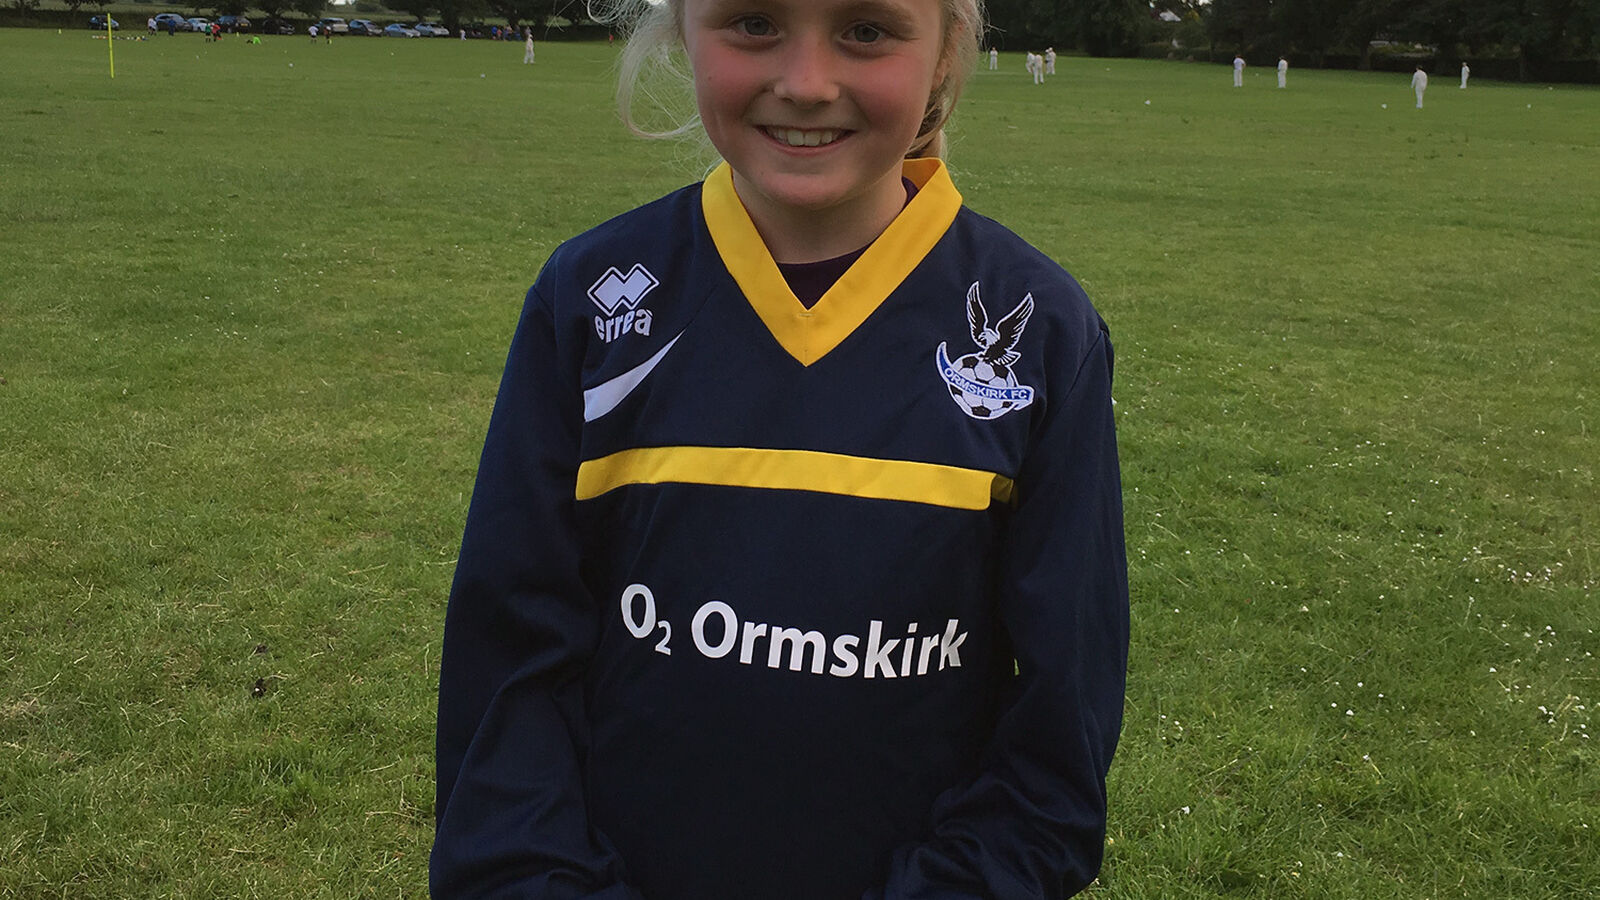 Ormskirk FC U9s Player Signs for Blackburn Rovers Ladies